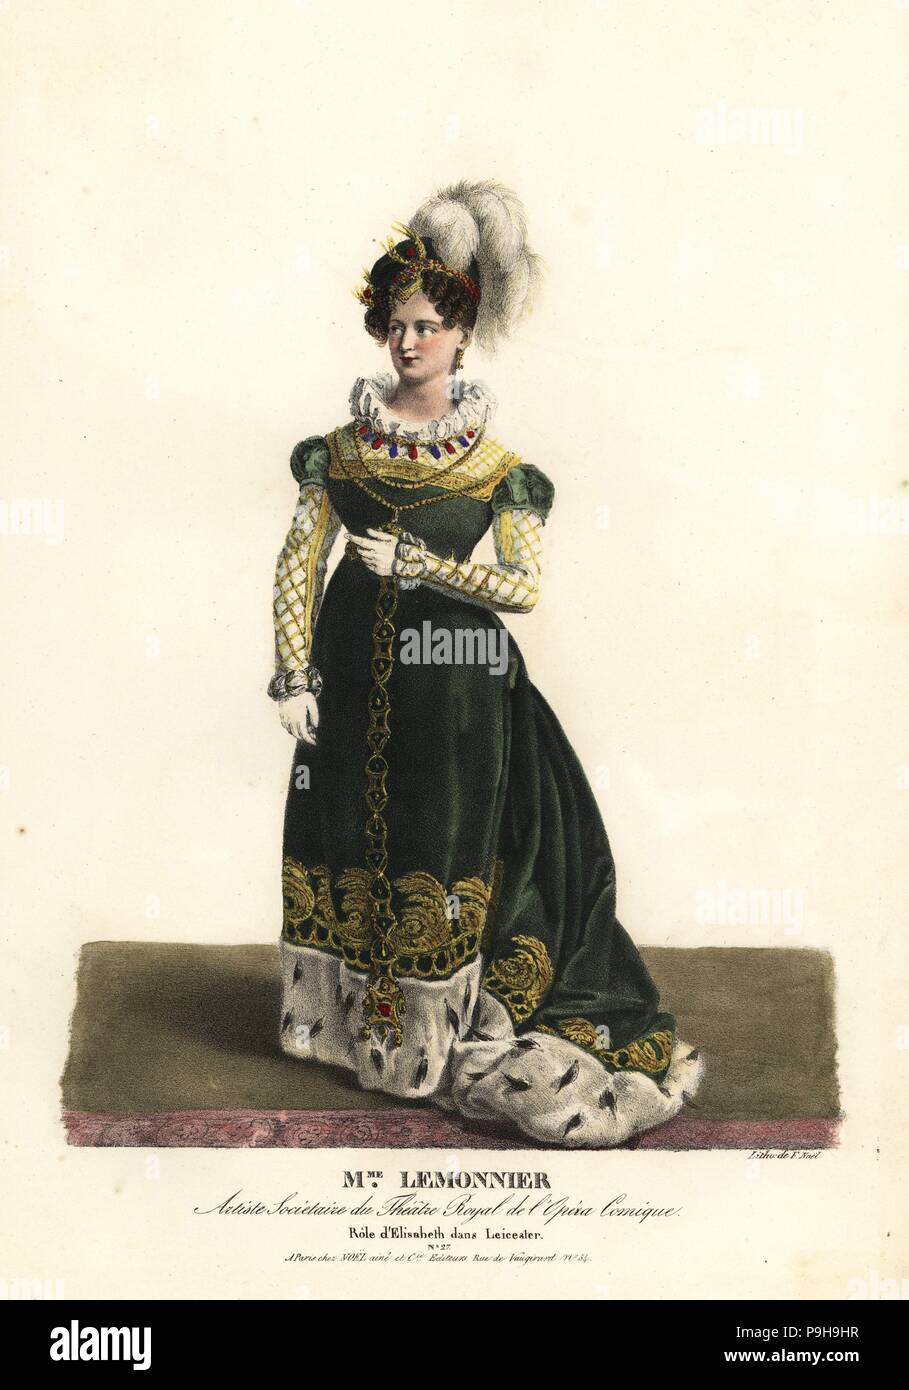 Soprano opera singer Madame Louise Therese Lemonnier as Elisabeth in Leicester by Daniel Auber, Theatre Royal de l'Opera Comique, 1823. Handcoloured lithograph by F. Noel after an illustration by Alexandre-Marie Colin from Portraits d'Acteurs et d'Actrices dans different roles, F. Noel, Paris, 1825. Stock Photo